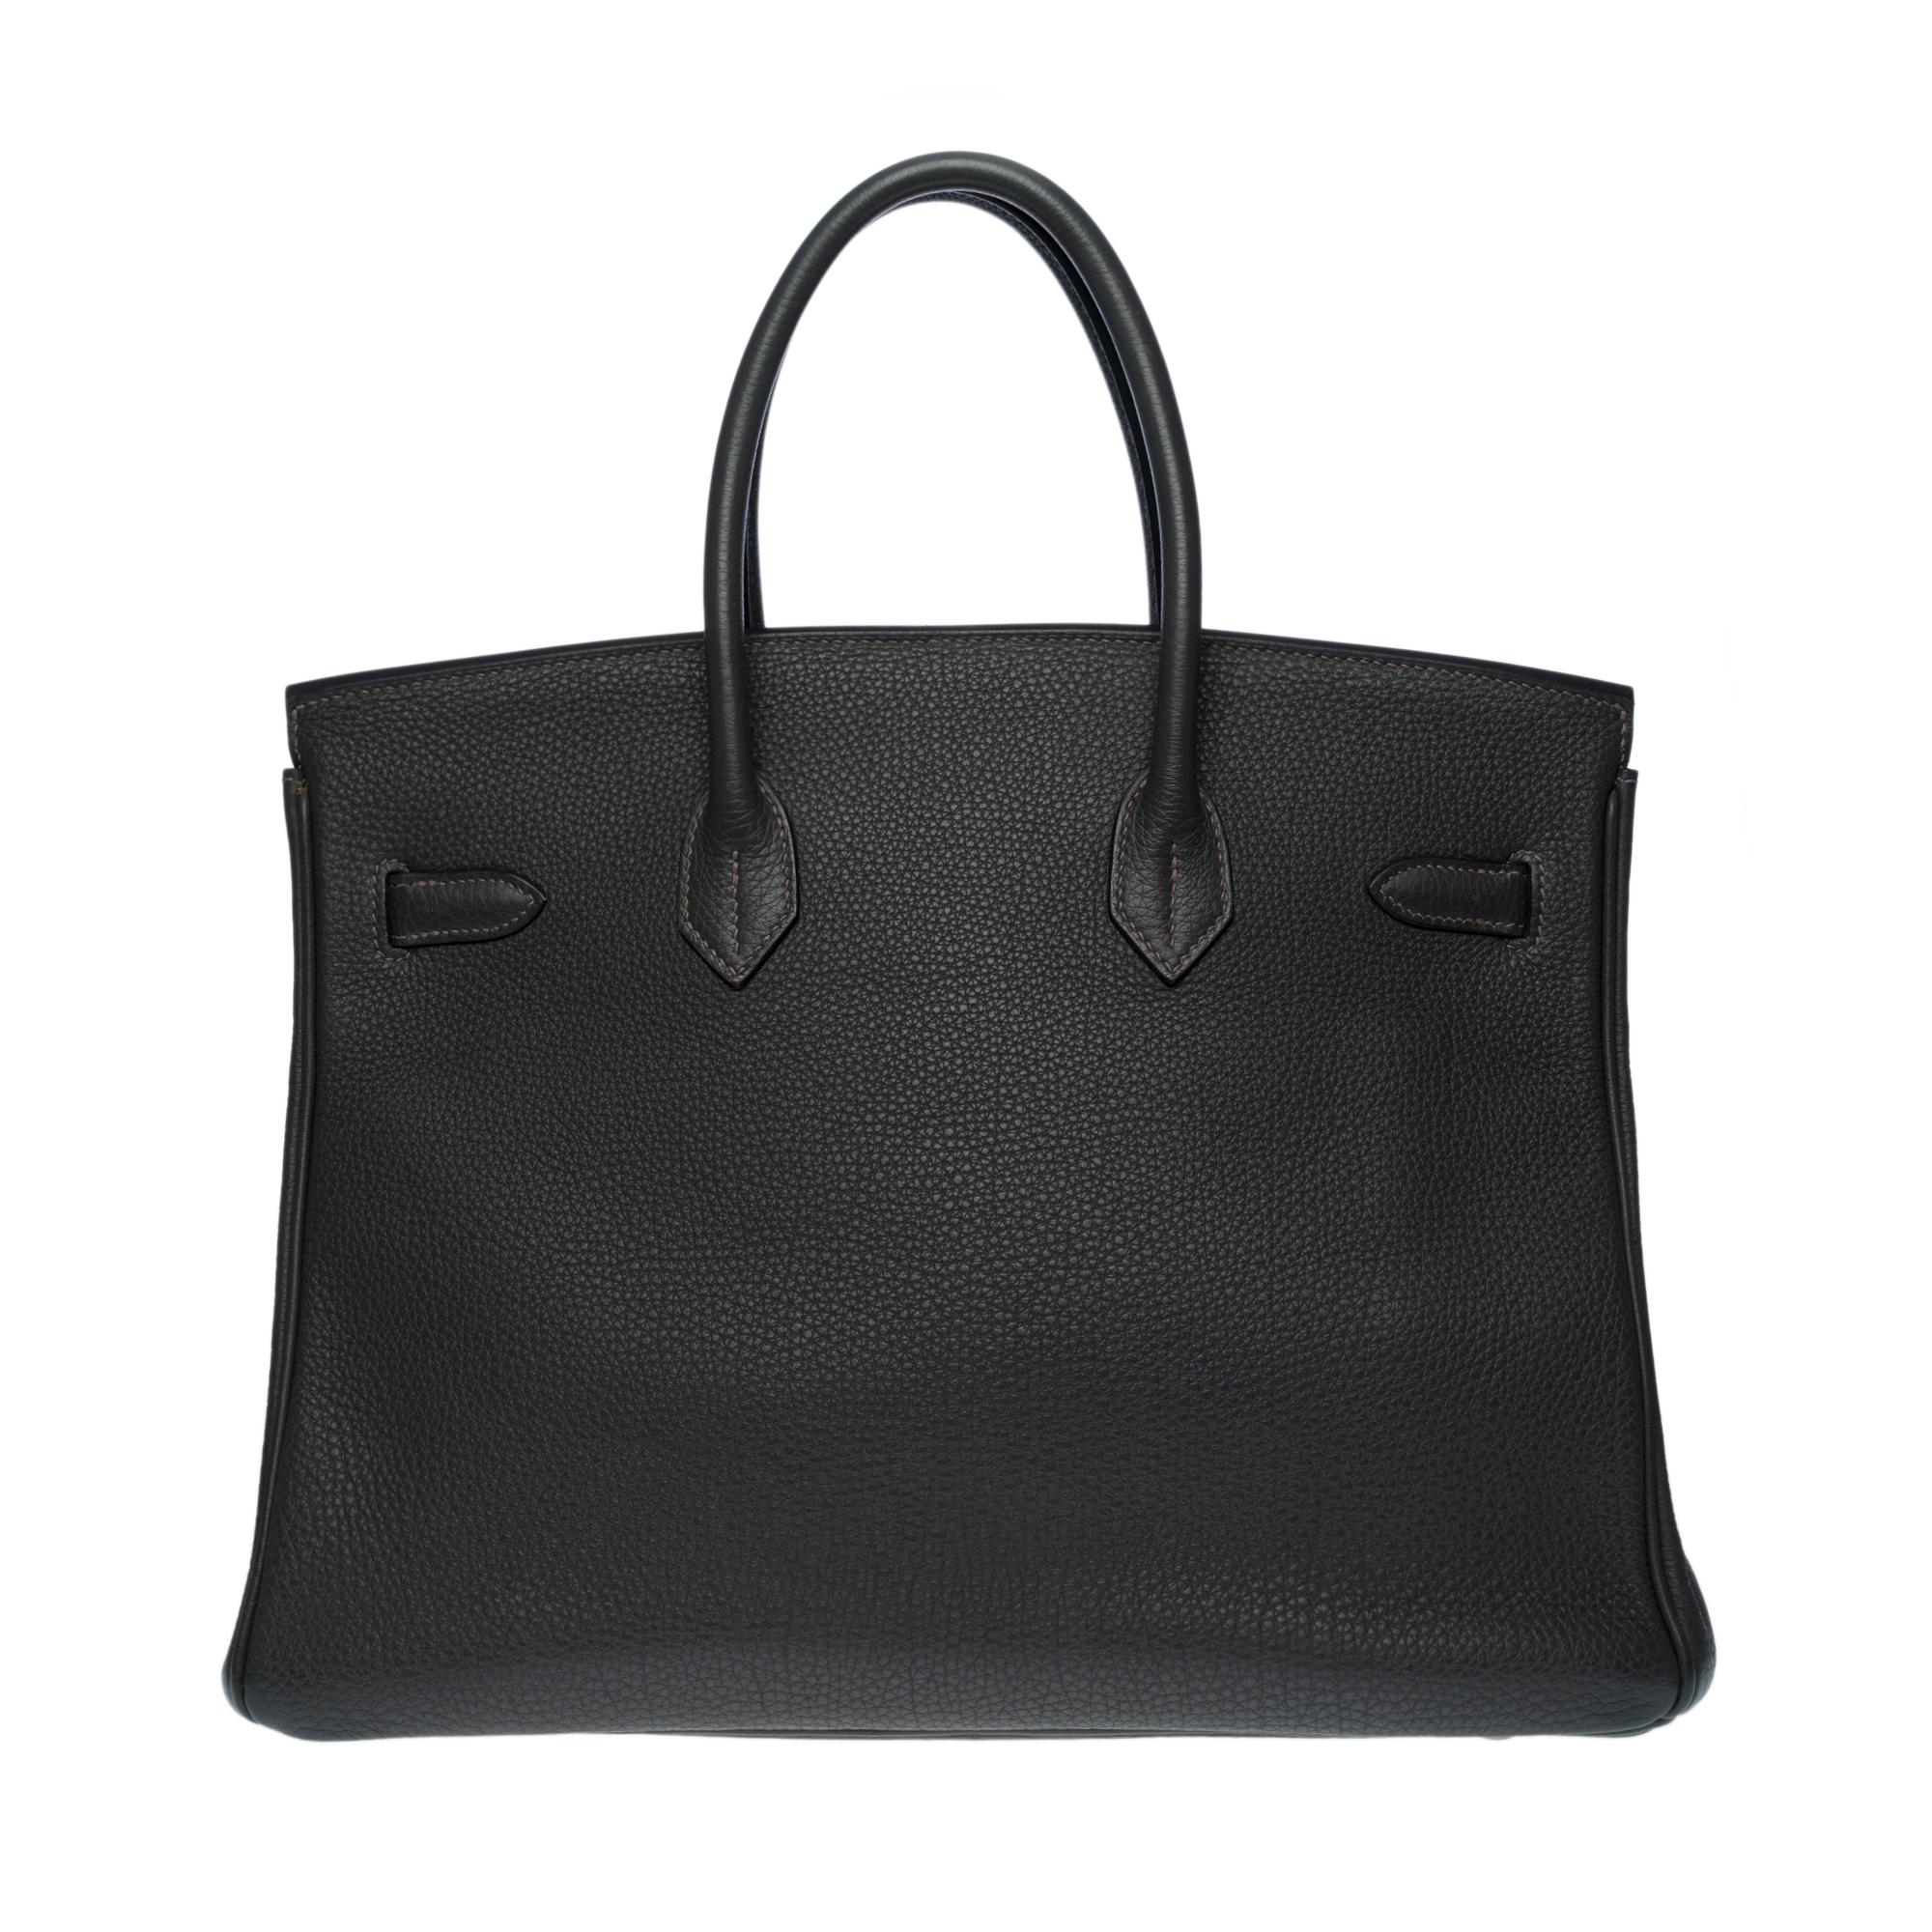 Exquisite Hermes Birkin 35 in Taurillon Clemence grey Graphite, ruthenium metal hardware, double handle in grey leather allowing a hand-carry

Flap closure
Inner lining in grey leather, one zippered pocket, one patch pocket
Signature: 